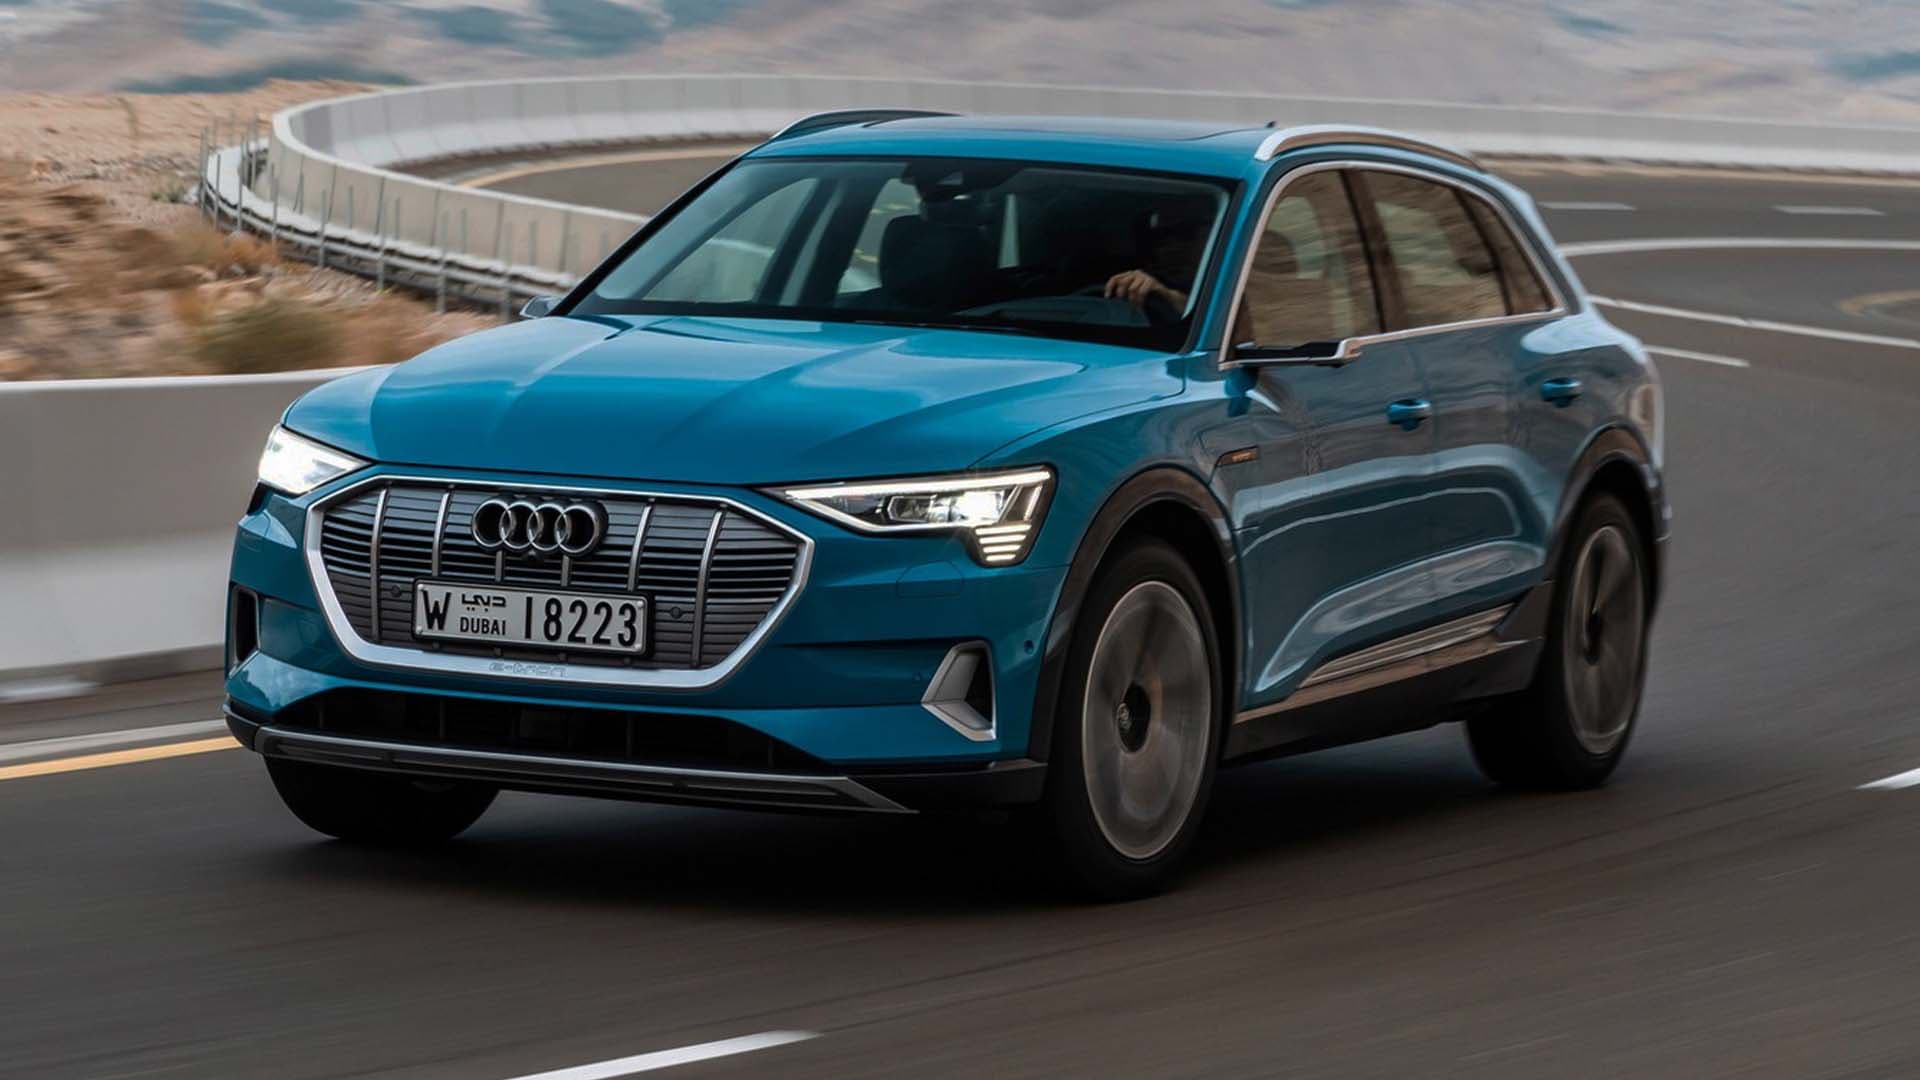 Early Audi E-Tron’s Disappointing Range Gains 12 Miles via Software Update